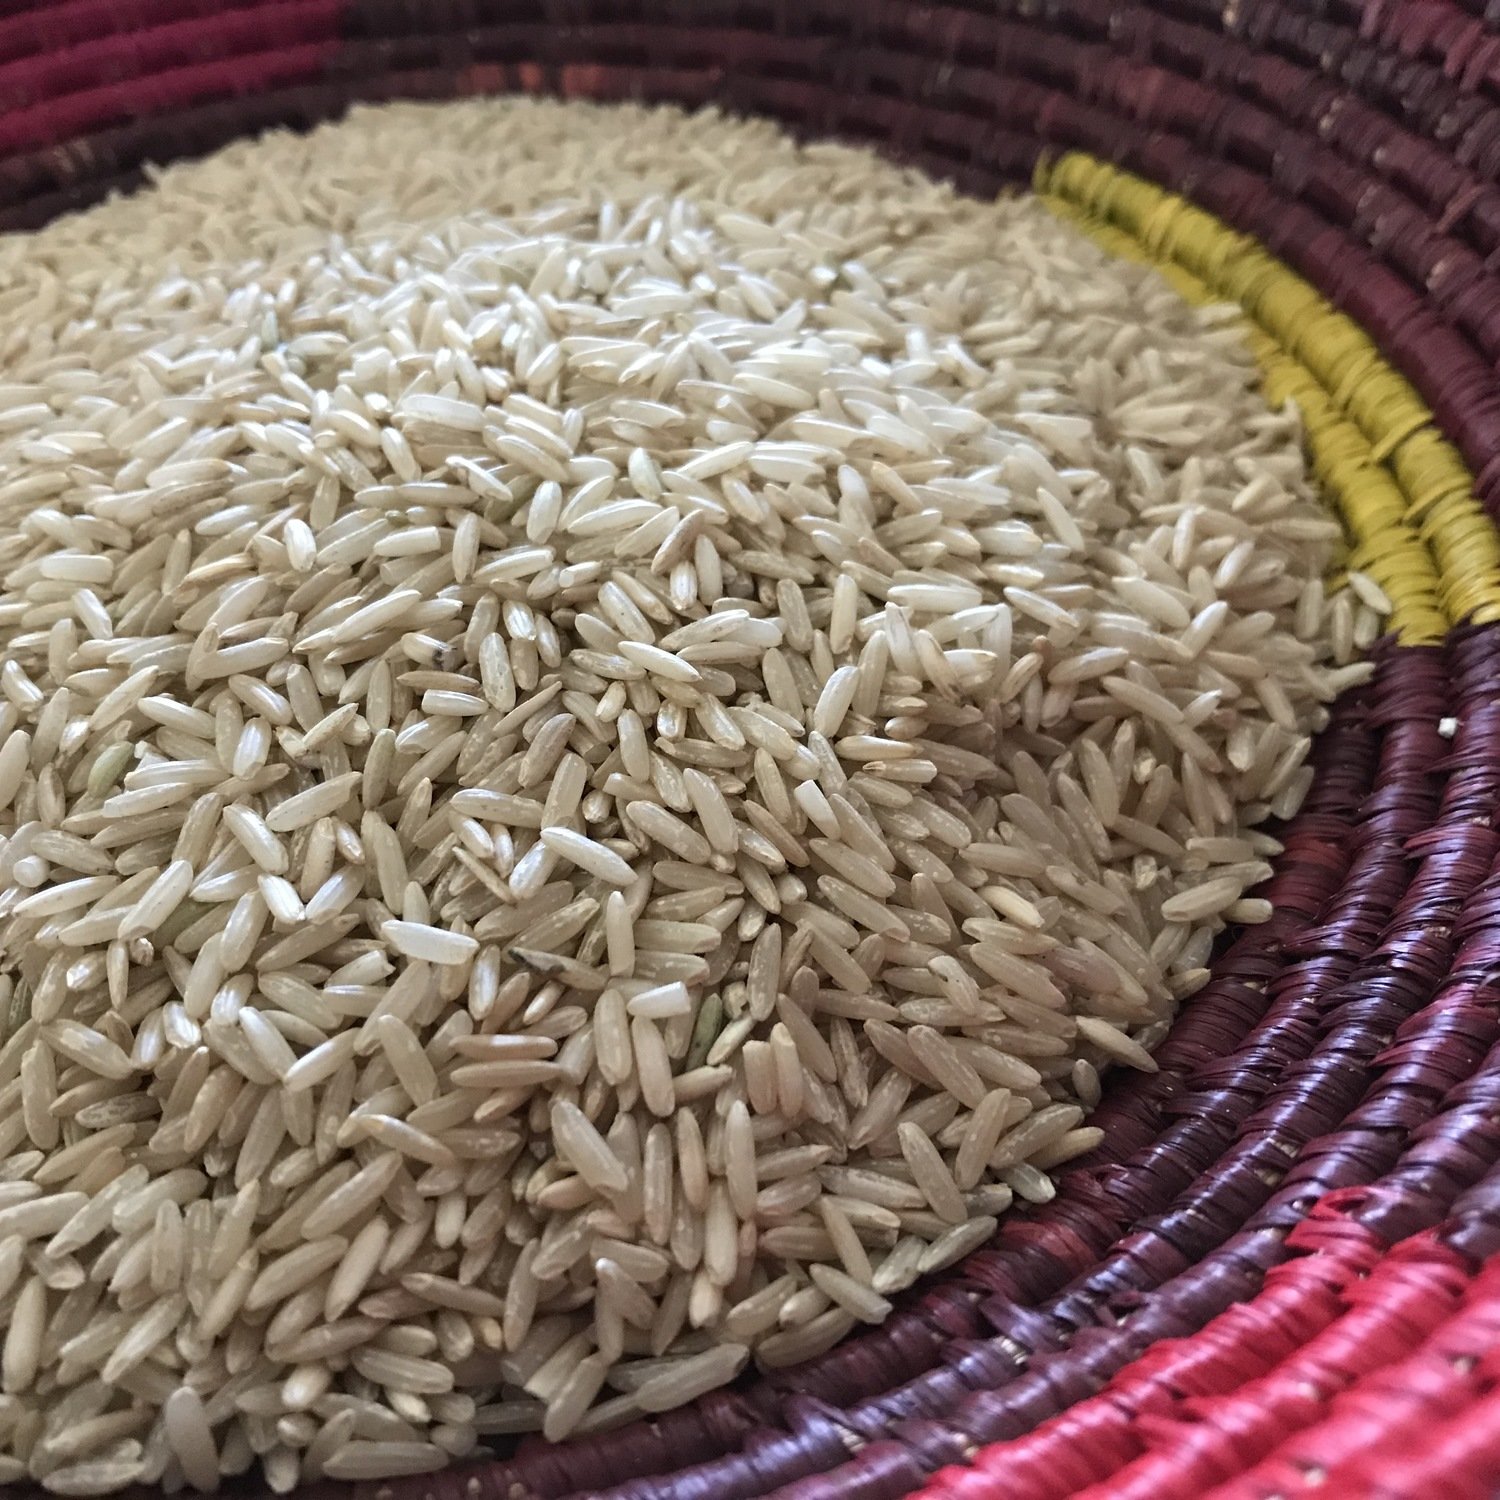 Donate a Christmas gift of 5 kg of rice to an artisan’s family